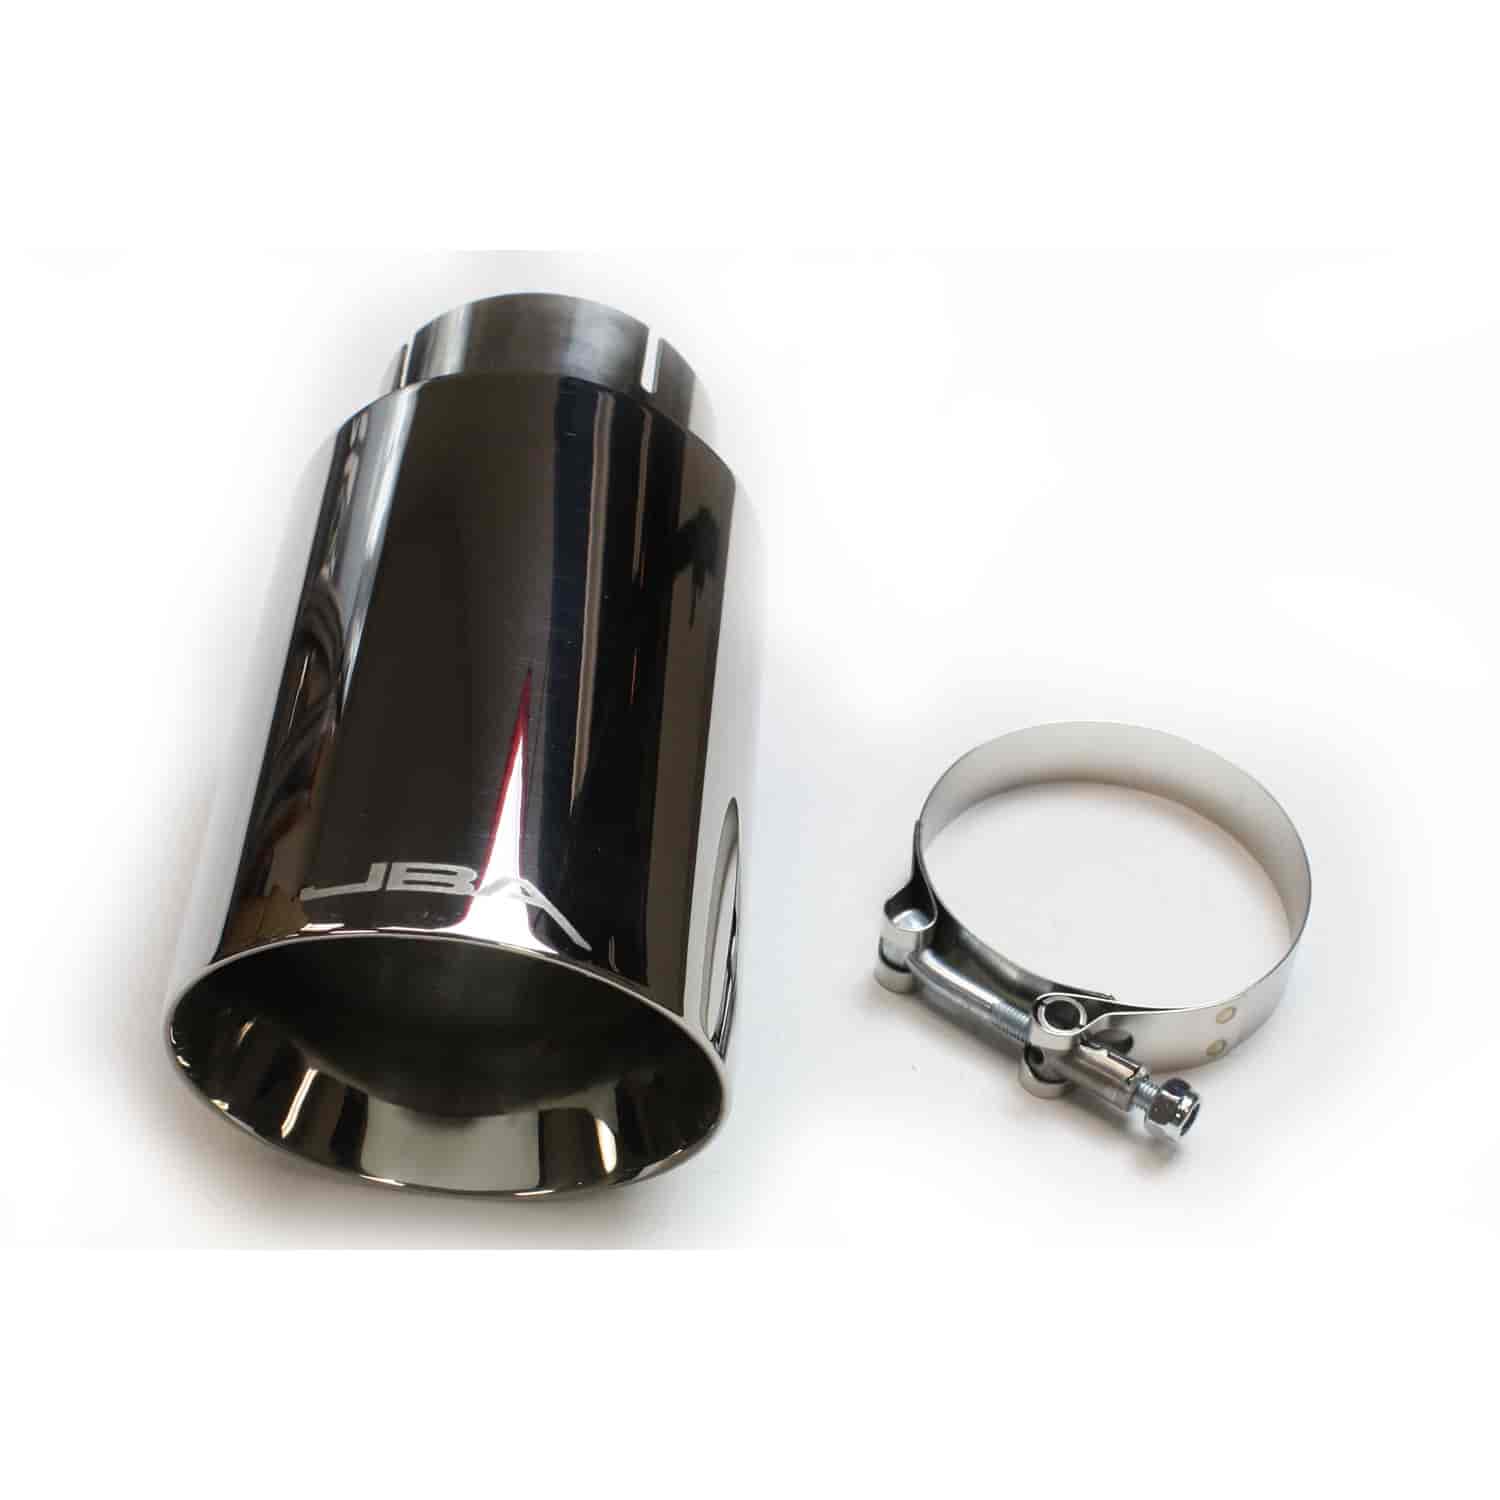 JBA Performance Exhaust 12-08282 2.5? x 4.5? x 8 1/4? Double Wall Polished S/S Chrome Tip - Clamp on